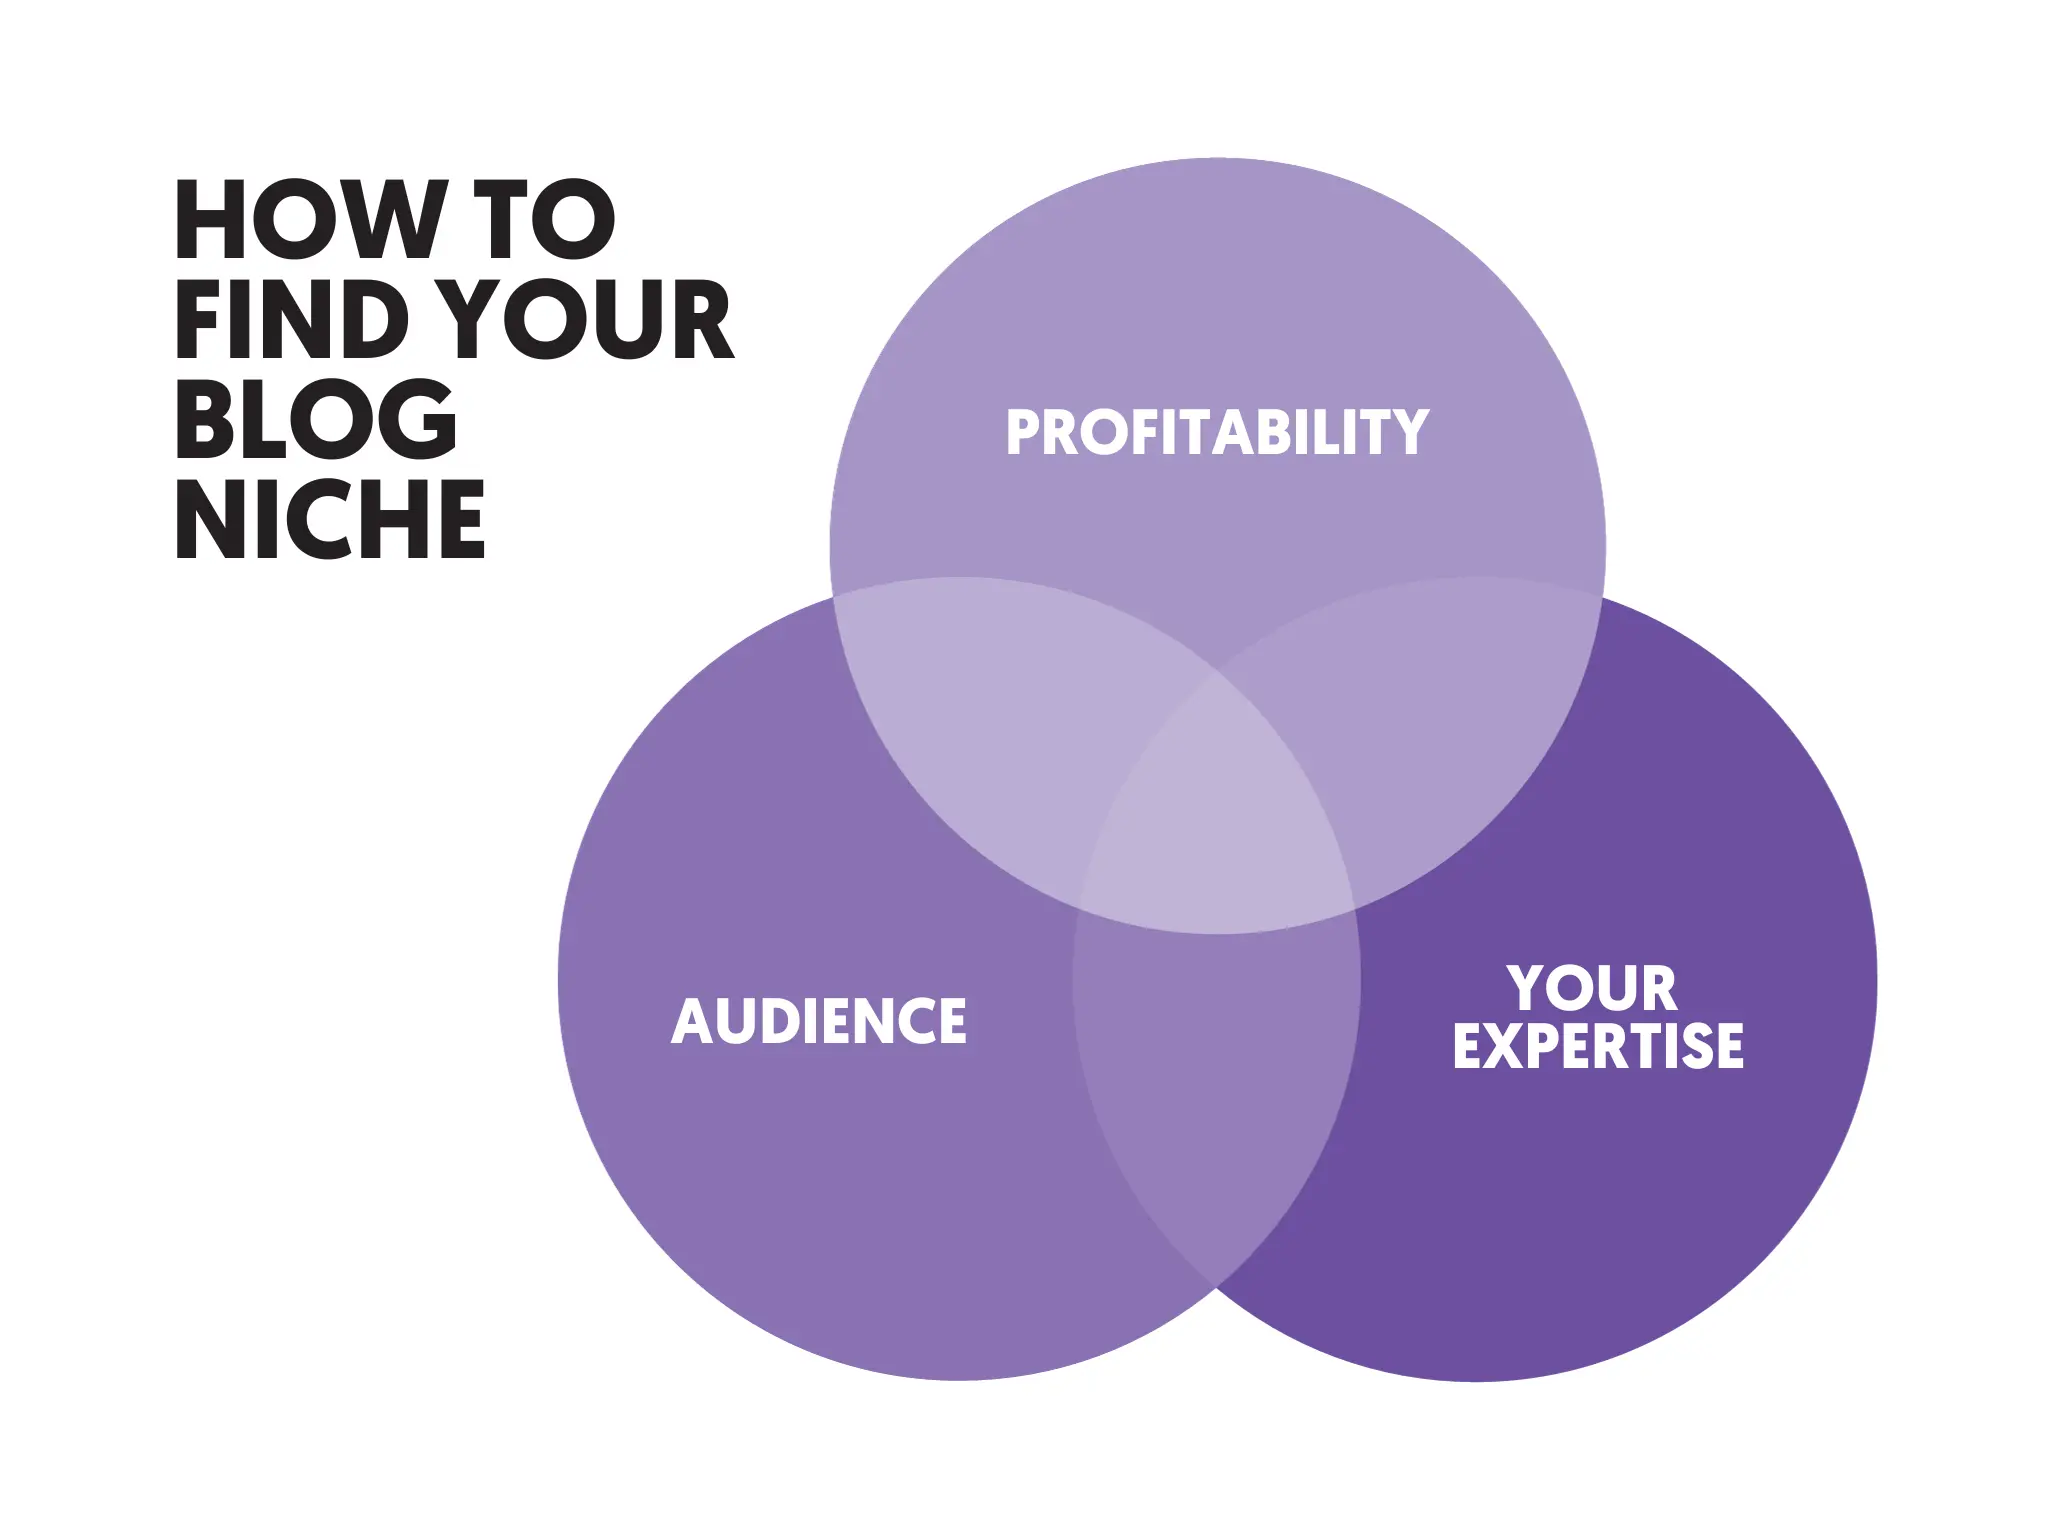 How to Find Your Blog Niche